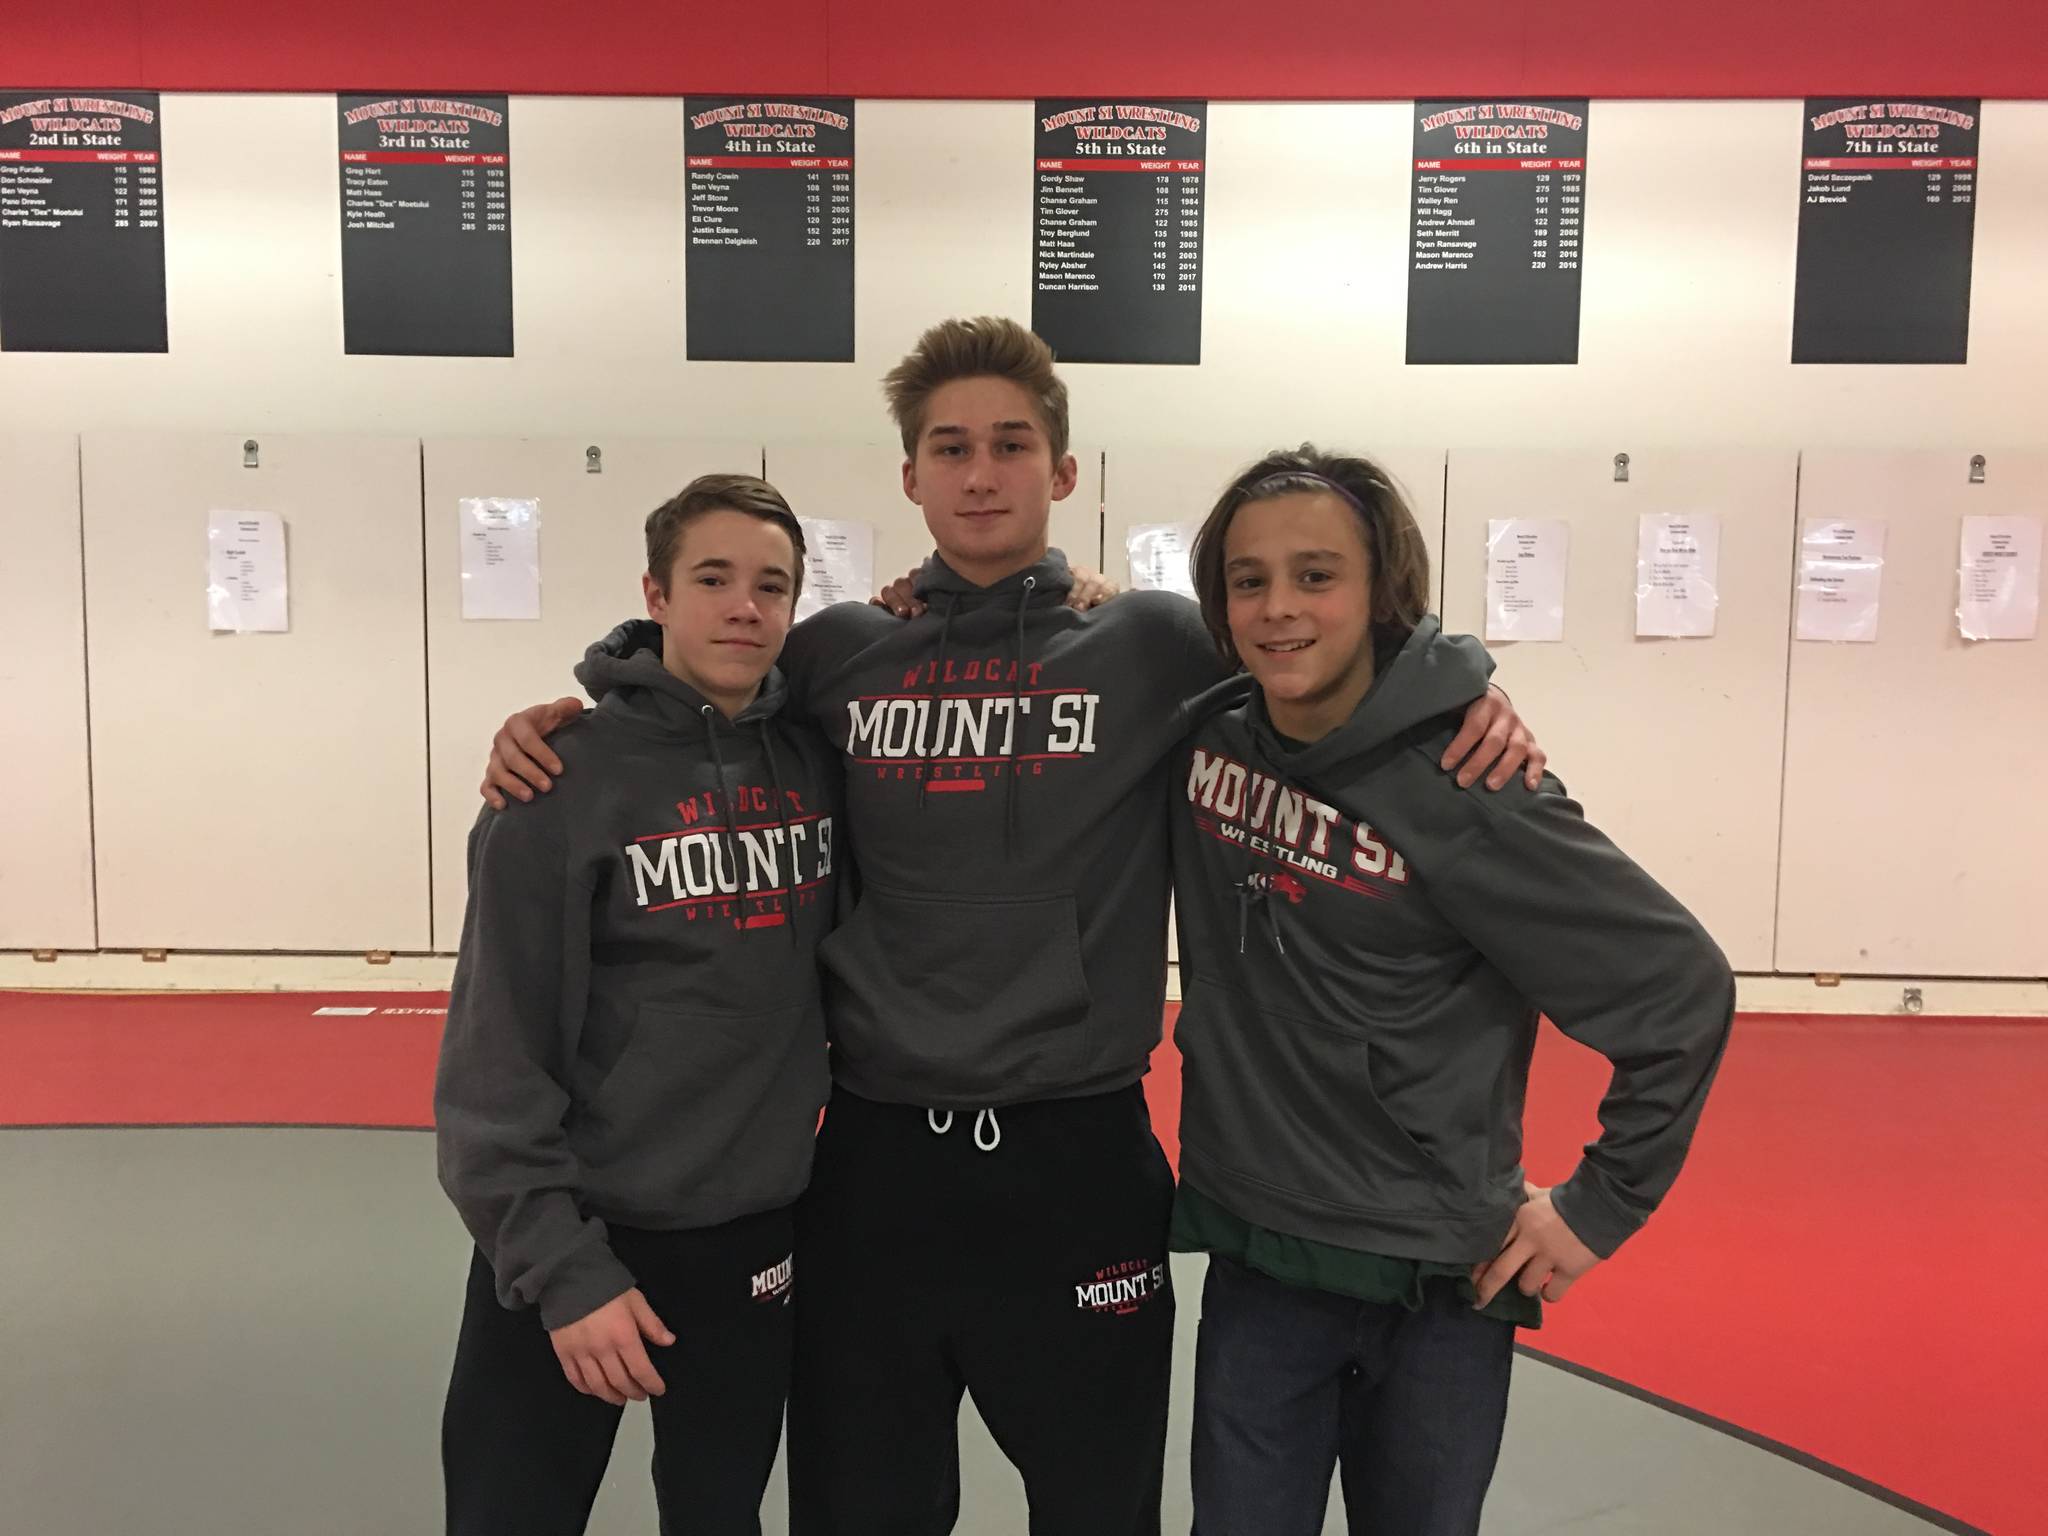 Mount Si’s wrestling stars, from left to right, Mark Marum, Spencer Marenco and Tryon Kaess. Courtesy of Tony Schlotfeldt